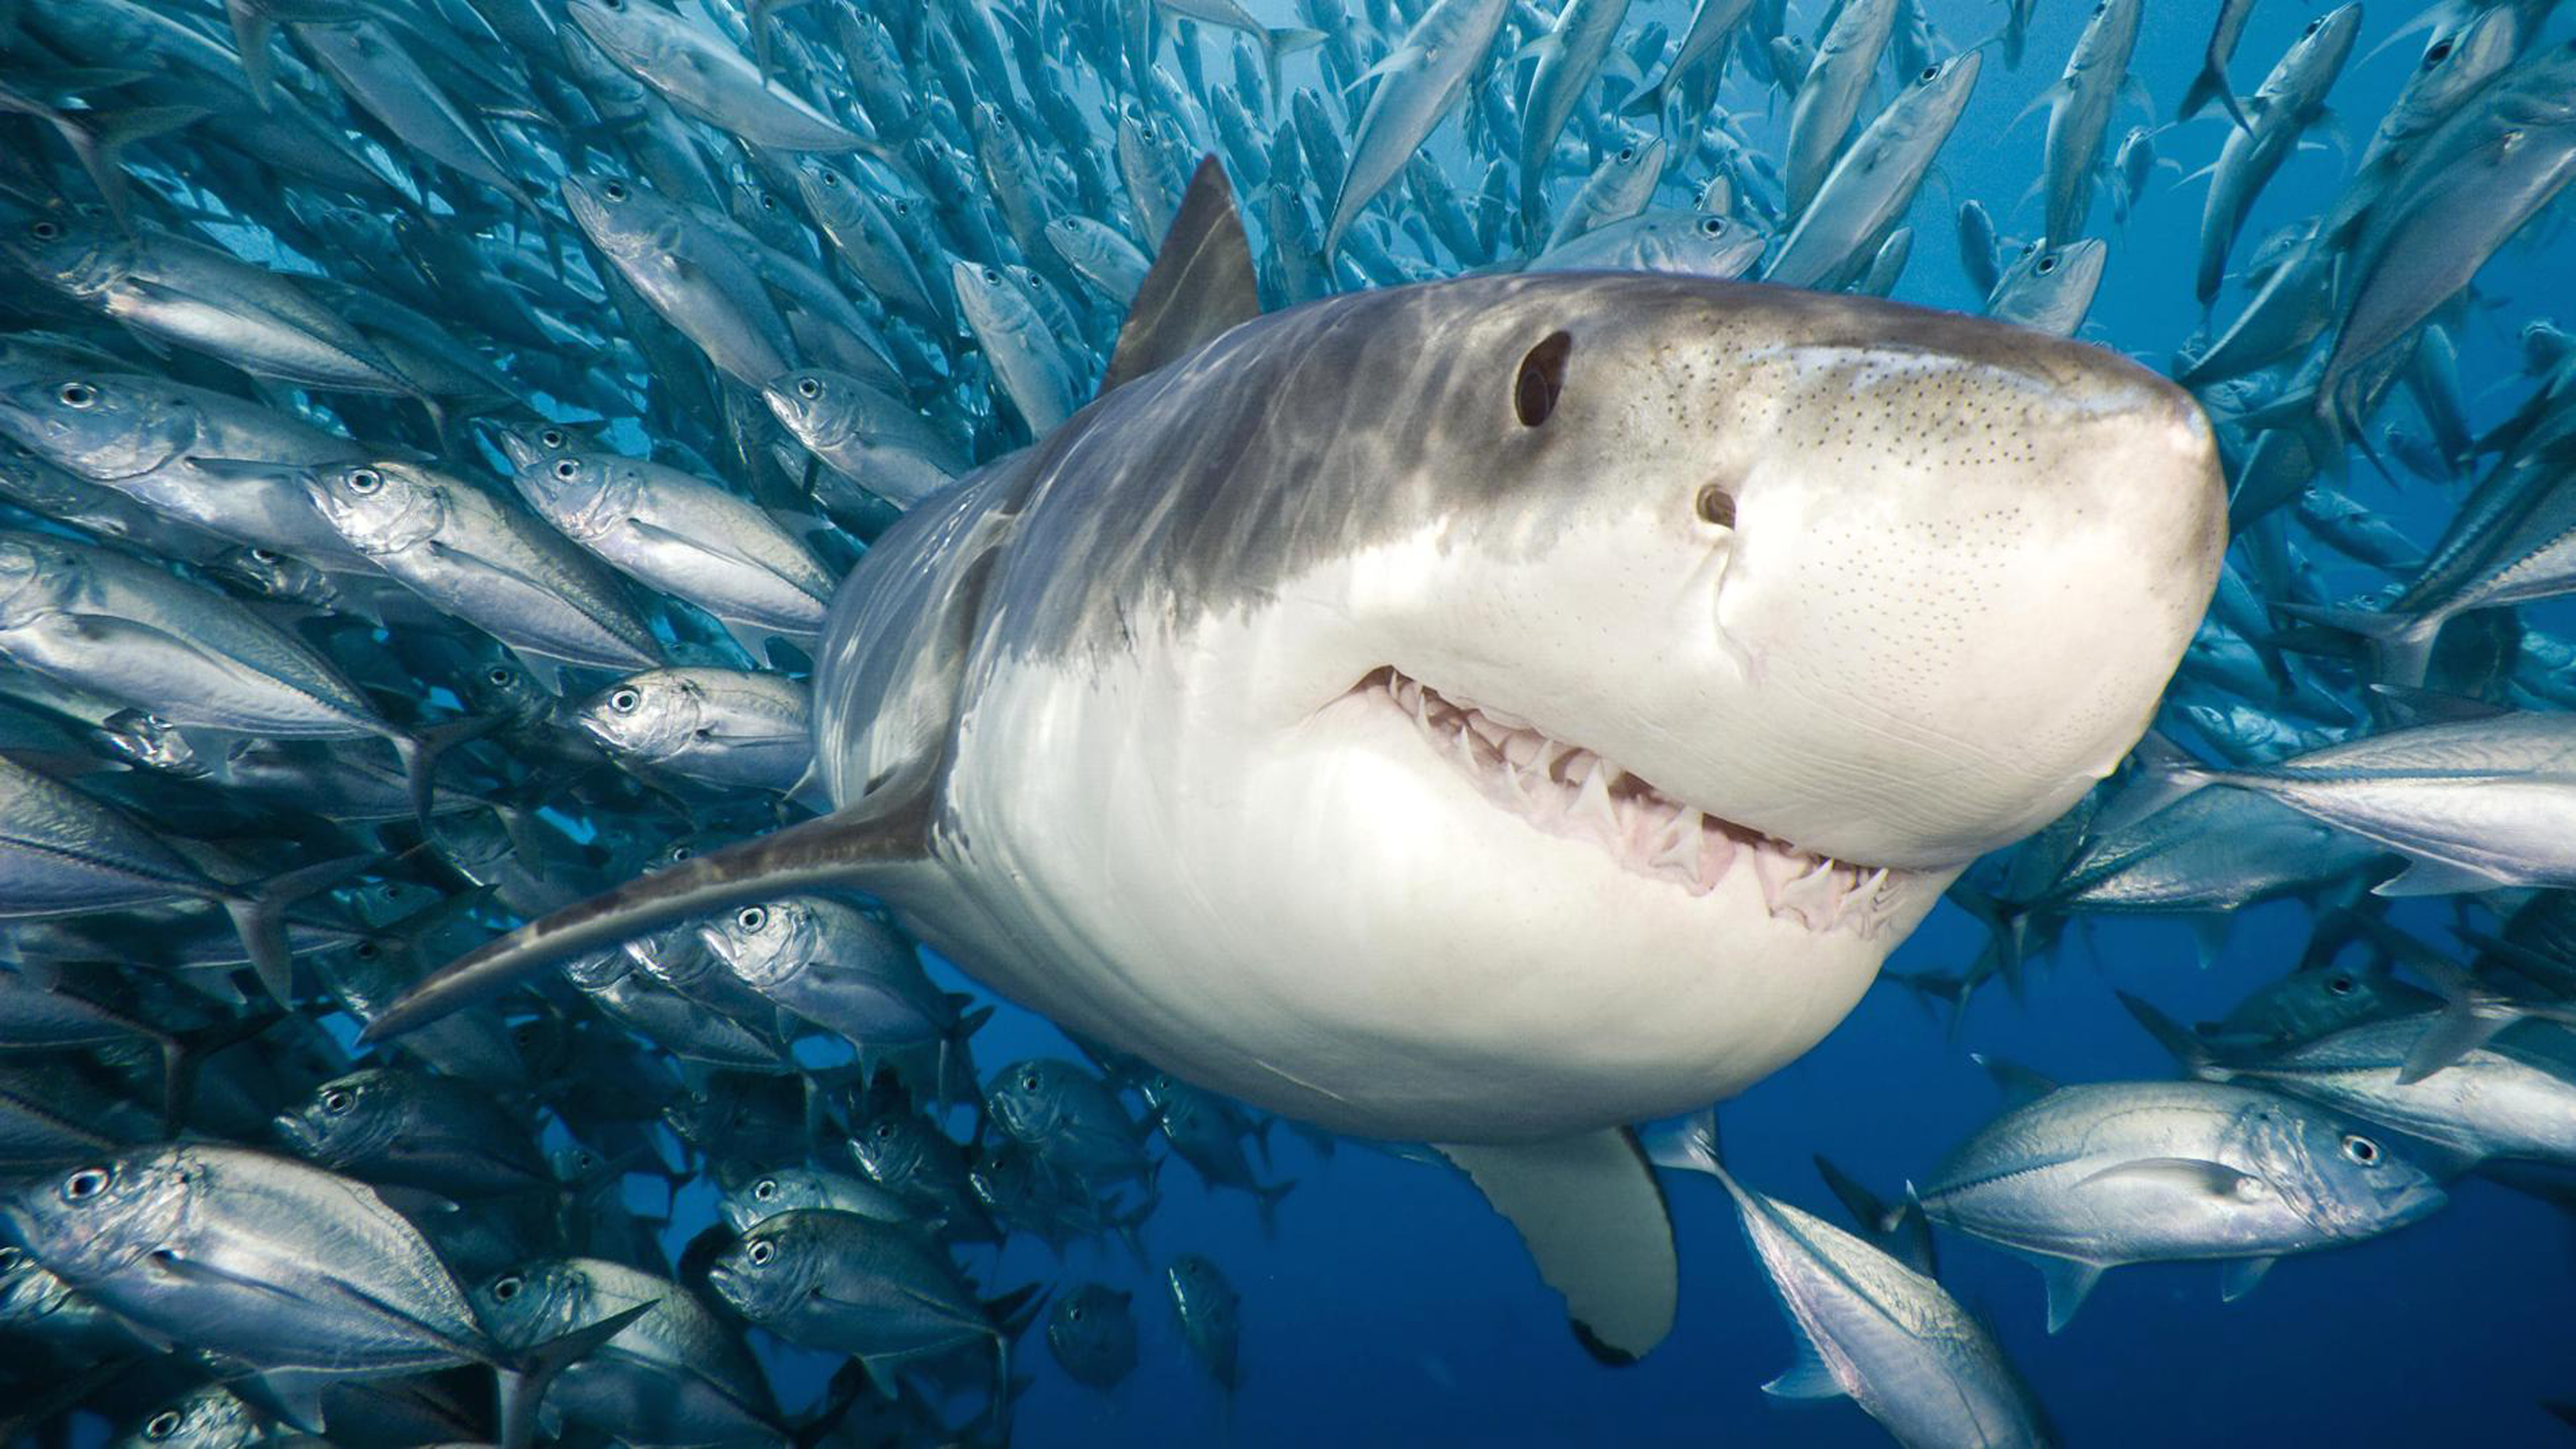 Great White Shark Accompanied By A Flock Of Fish Wallpaper Widescreen Hd.